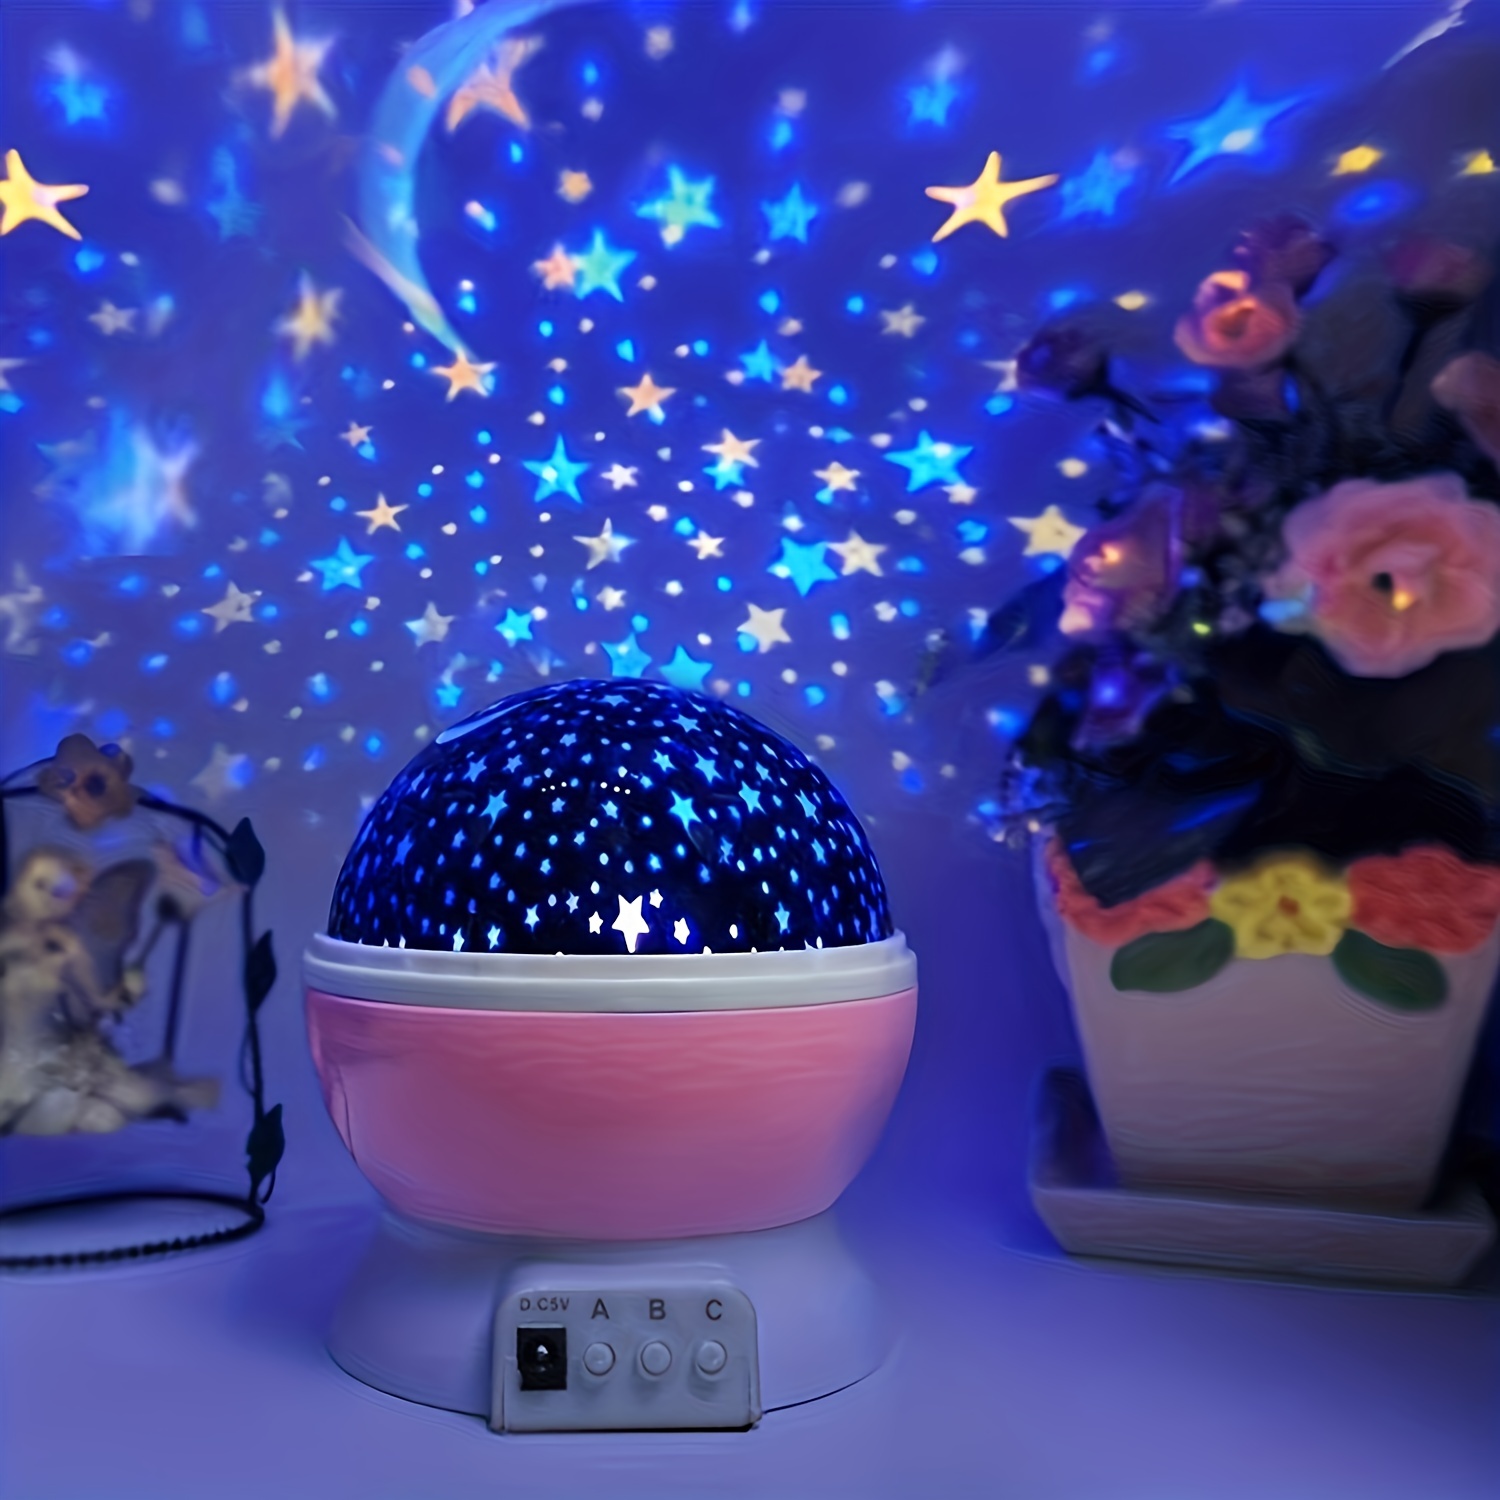 

Dream Luminous Lamp, Star Night Light, 12 Color Changing Lights Modes With Usb Cable, 360°rotating Moon Star Projector Desk Lamp For Bedroom Party Decor Birthday Gift